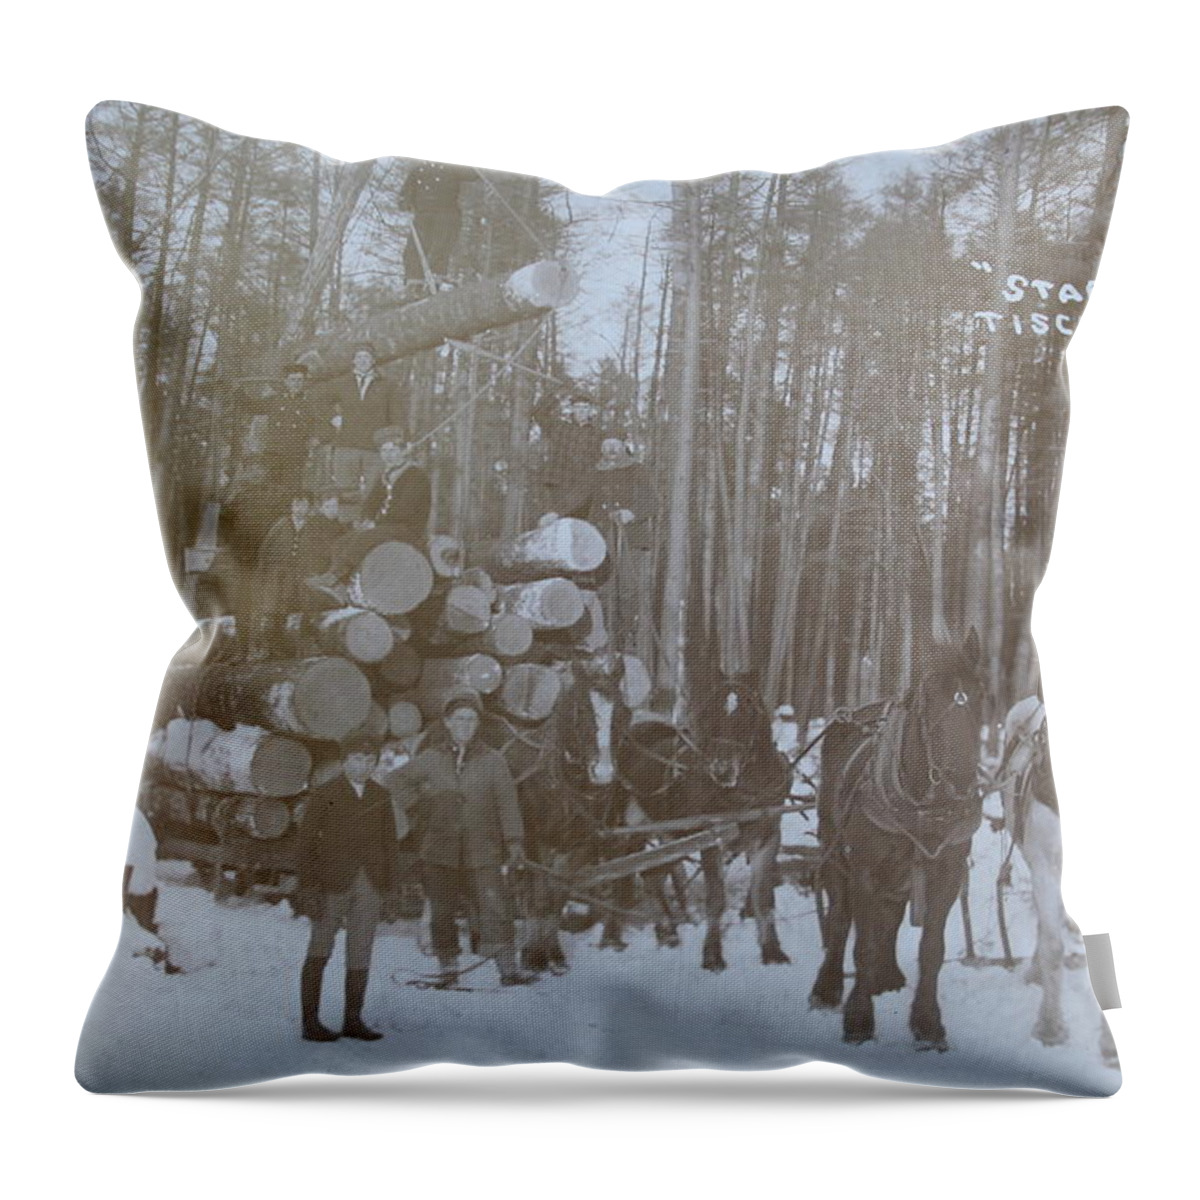 Vintage Photograph Throw Pillow featuring the photograph Star Load by Tammy Schneider